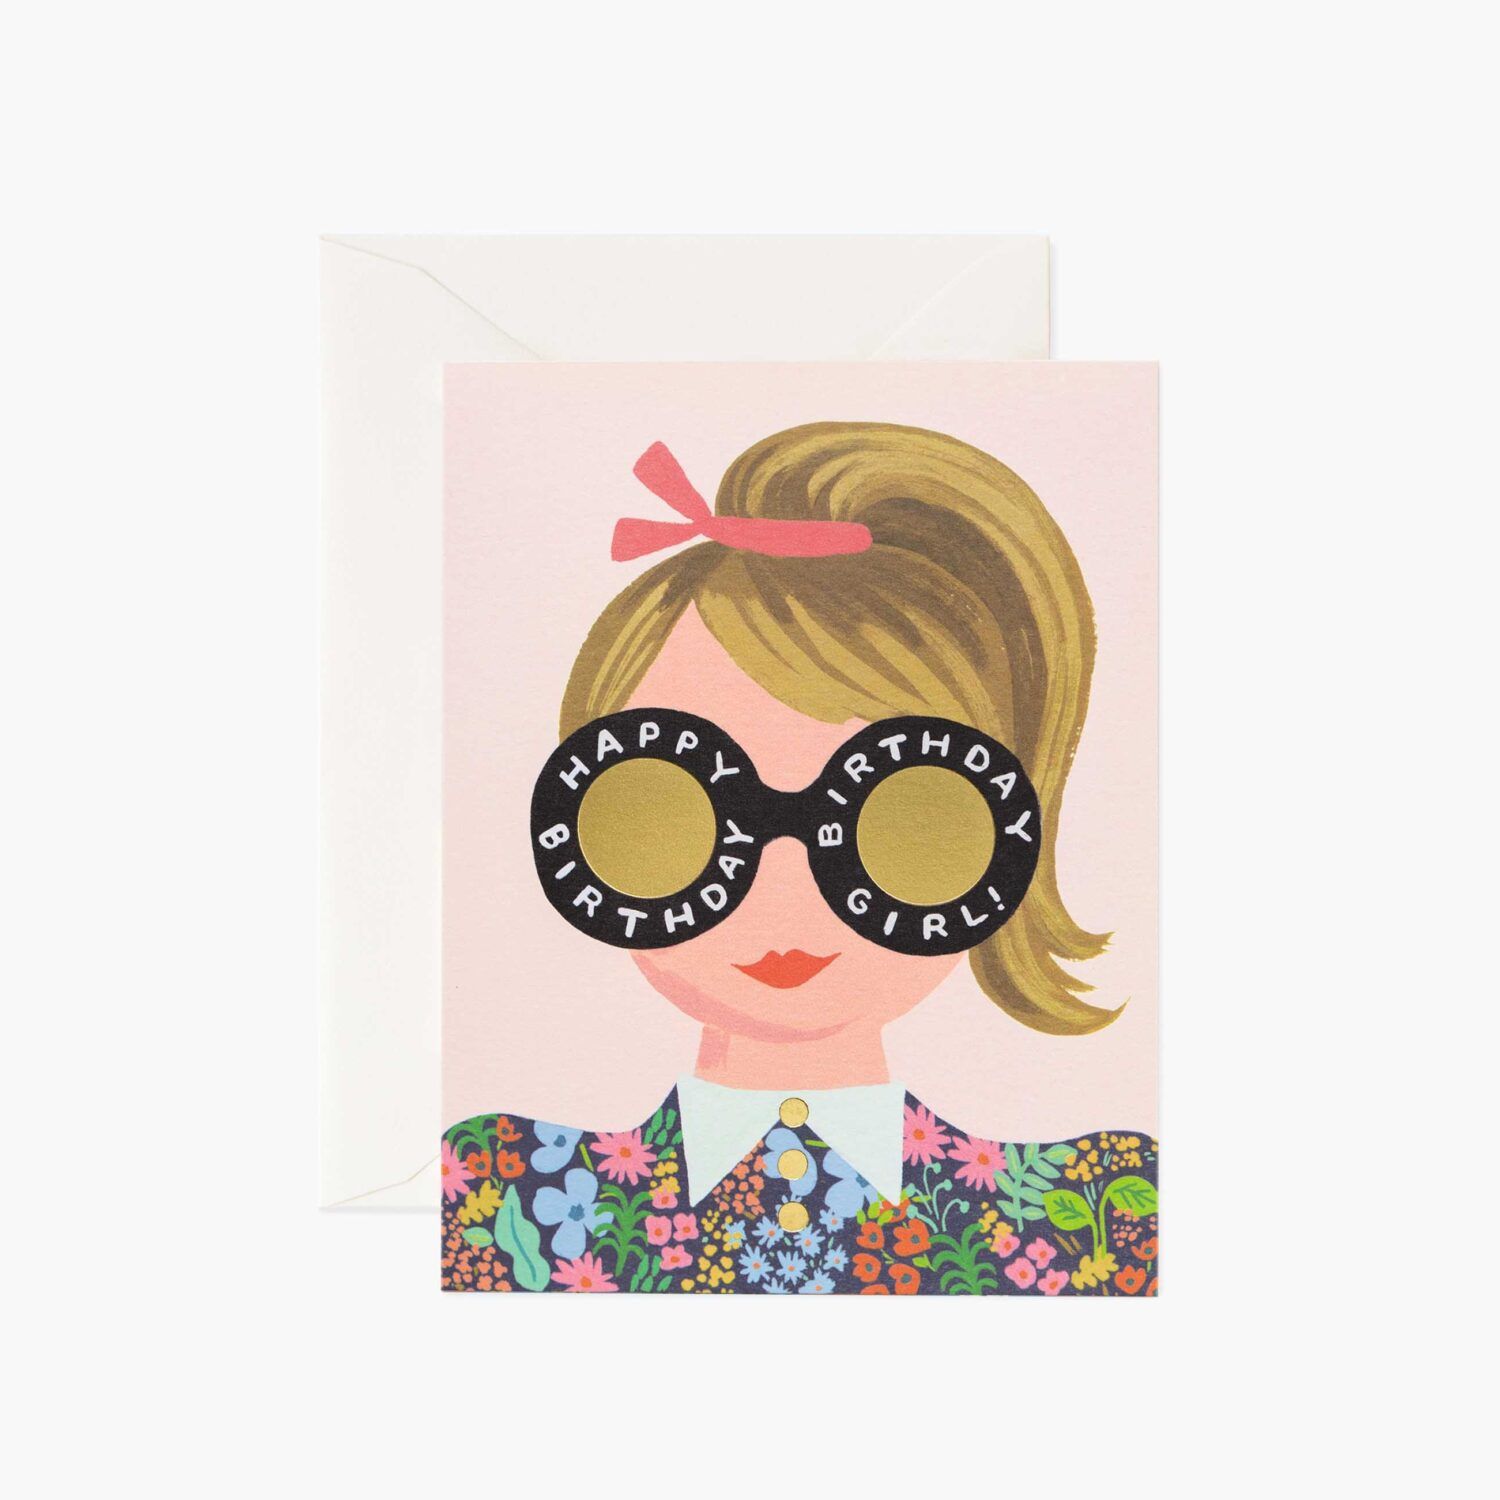 Rifle Paper Co. "Meadow Birthday Girl" Greeting Card